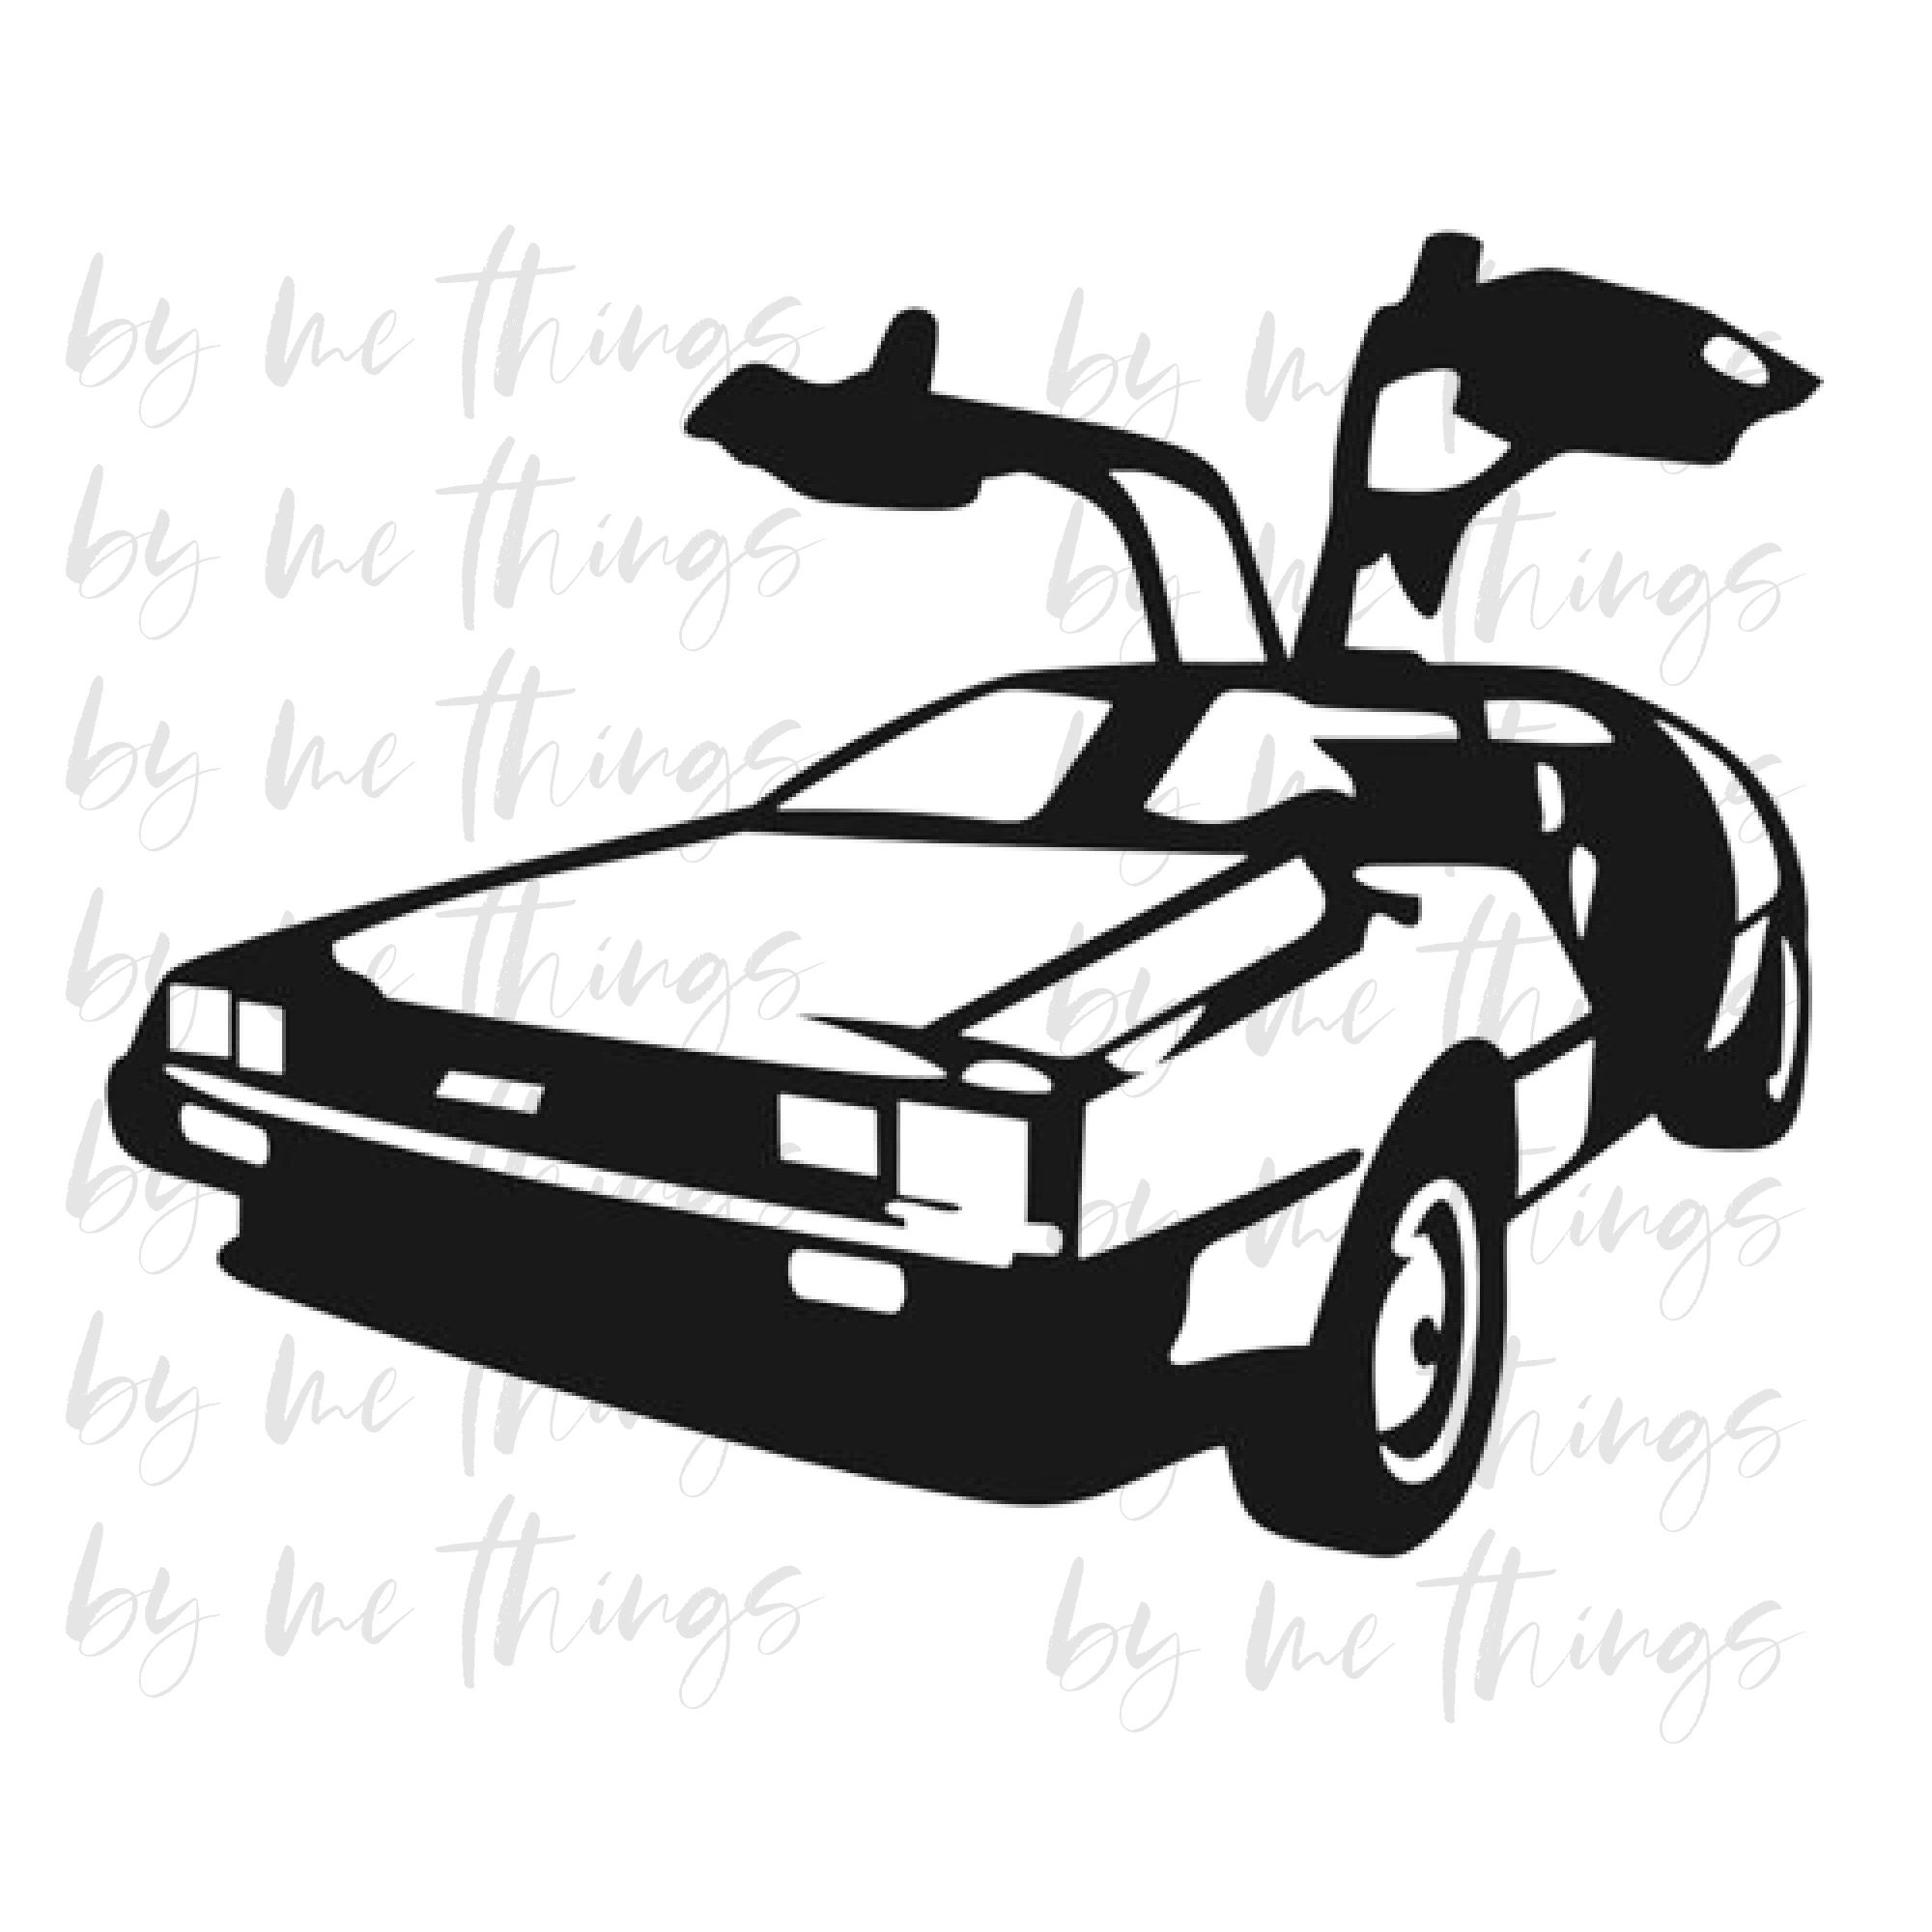 You can buy a hovering DeLorean Time Machine and Hoverboards | Geek Culture